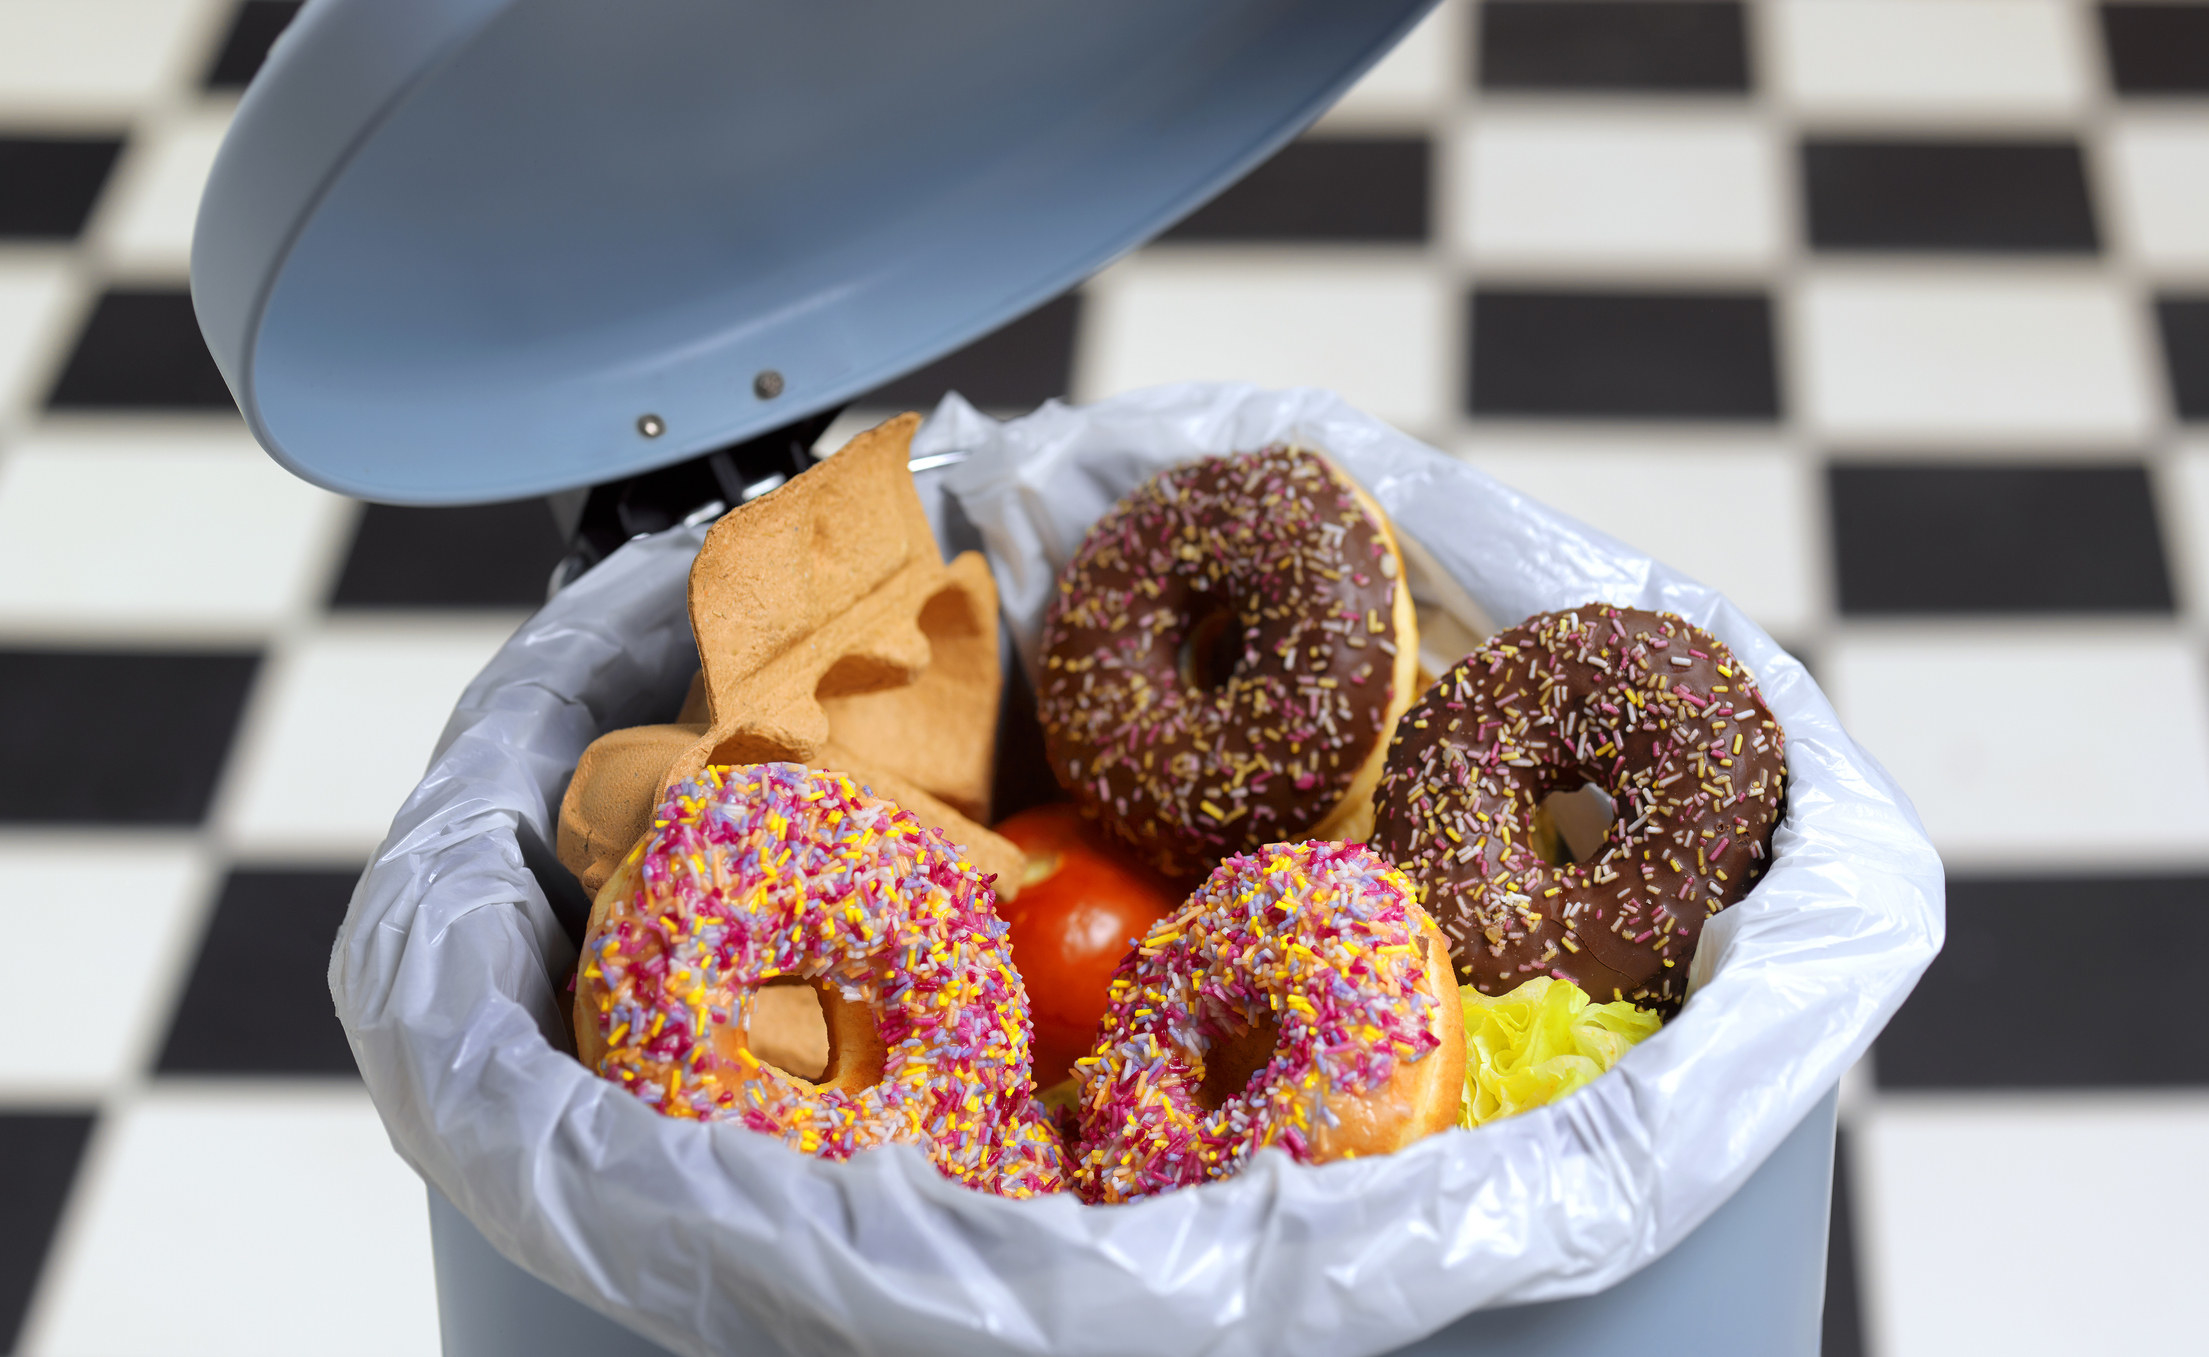 Donuts in the trash can